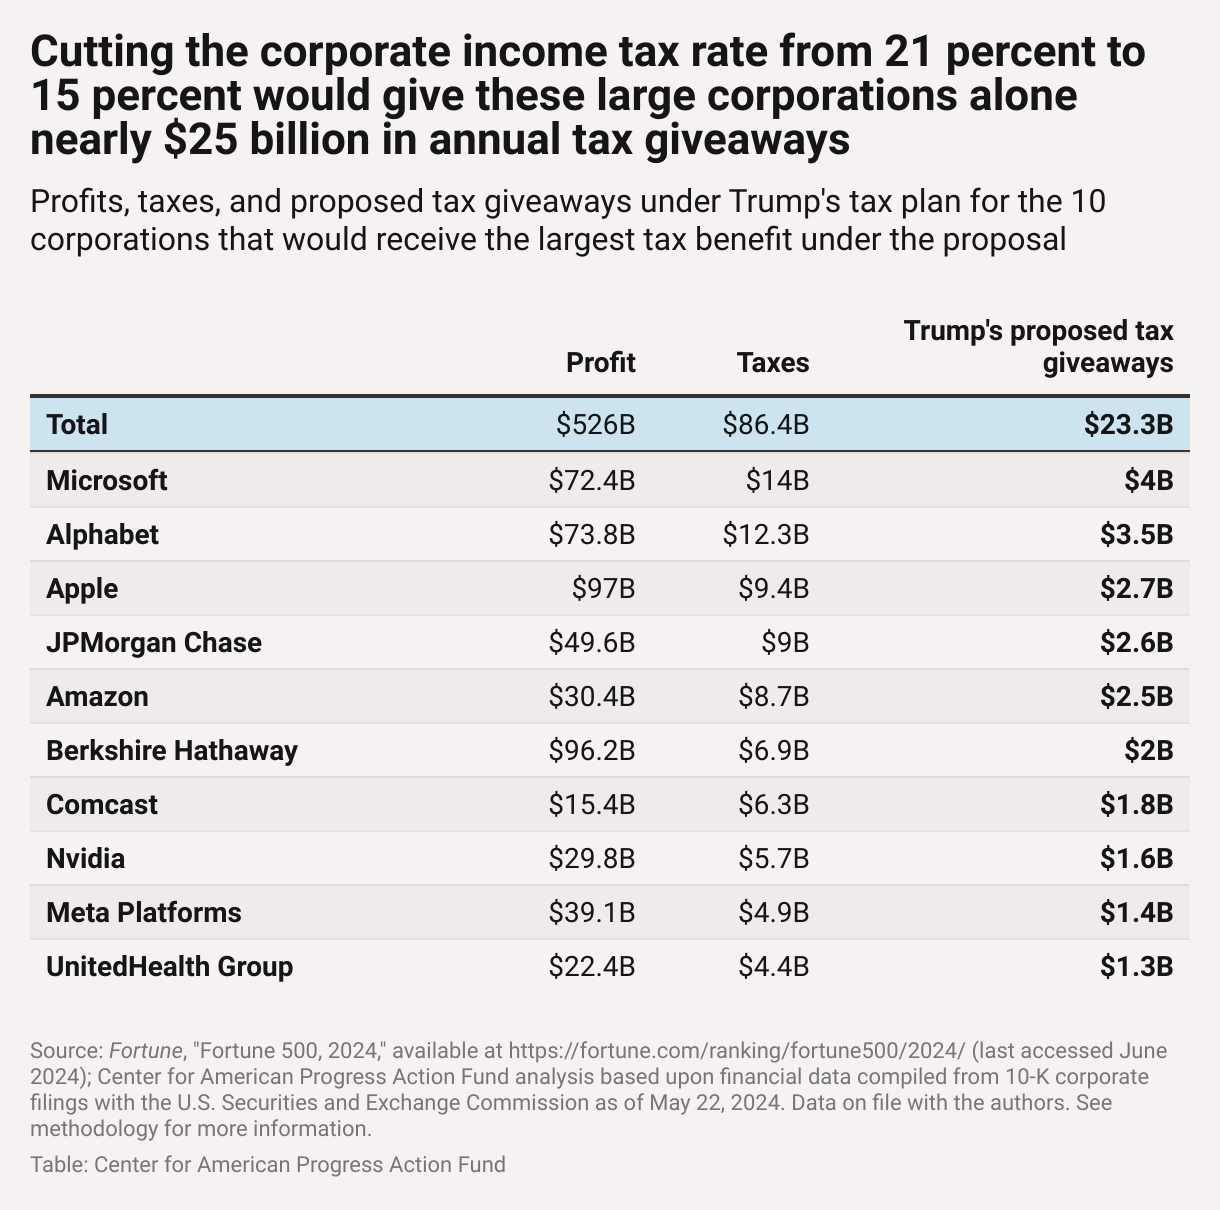 Table showing the Fortune 500's largest 10 companies' latest reported profits and federal income taxes paid along with the tax savings each company would receive from Trump's proposed corporate income tax cut, with Alphabet receiving the largest tax cut ($4.9 billion) and Microsoft receiving the secont largest ($4.0 billion).